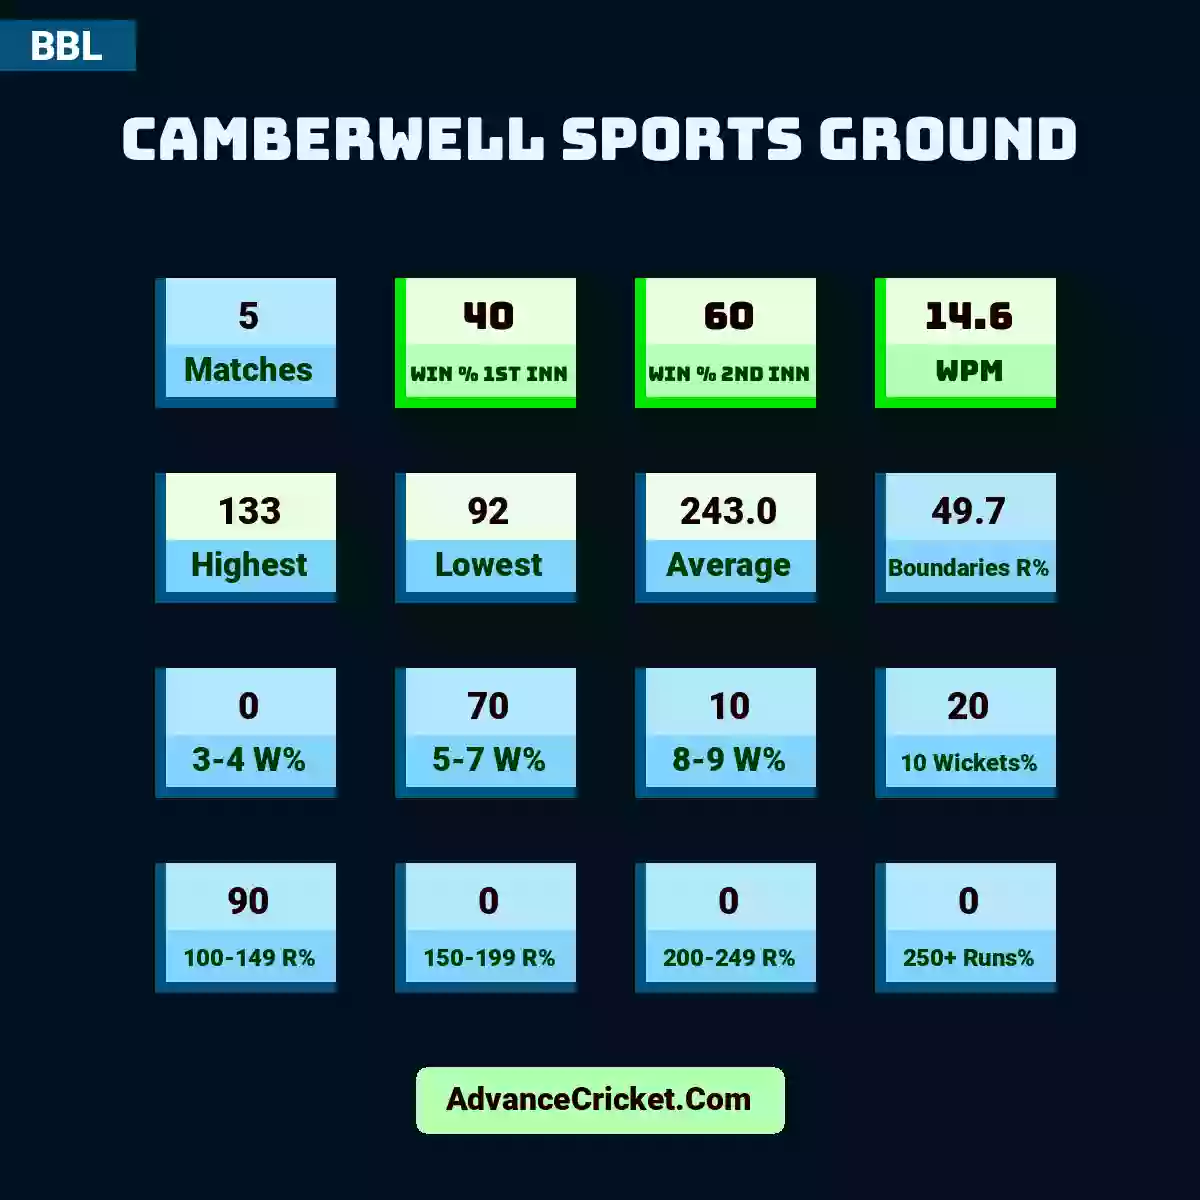 Image showing Camberwell Sports Ground with Matches: 5, Win % 1st Inn: 40, Win % 2nd Inn: 60, WPM: 14.6, Highest: 133, Lowest: 92, Average: 243.0, Boundaries R%: 49.7, 3-4 W%: 0, 5-7 W%: 70, 8-9 W%: 10, 10 Wickets%: 20, 100-149 R%: 90, 150-199 R%: 0, 200-249 R%: 0, 250+ Runs%: 0.